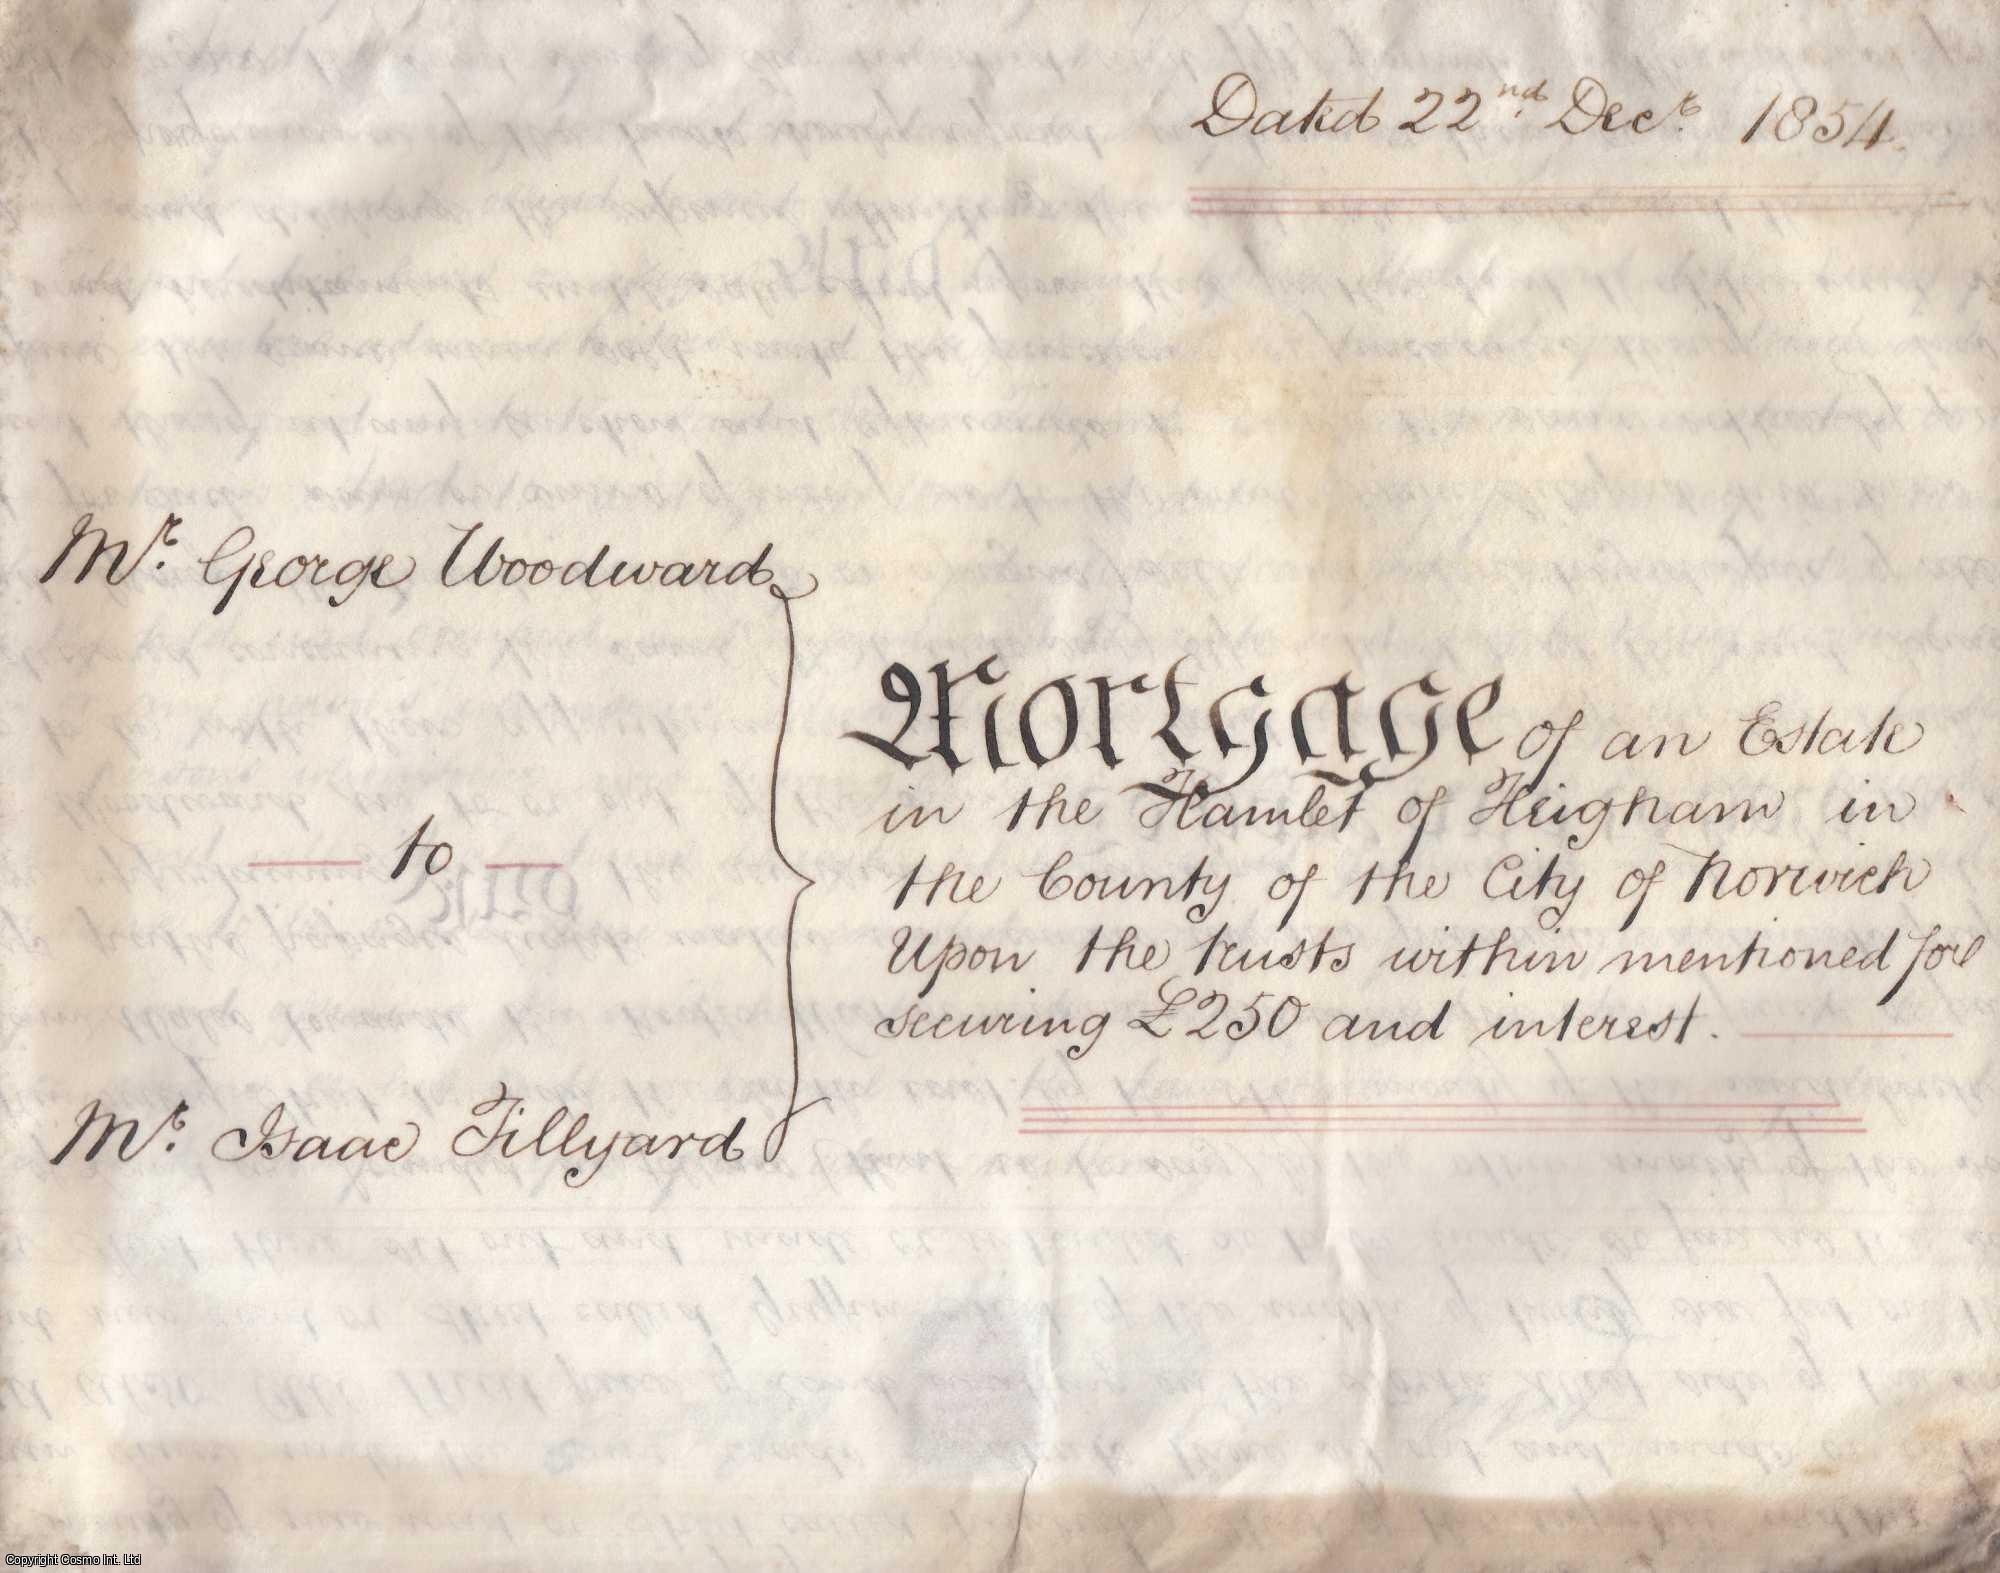 1854 Mortgage Heigham, Norfolk - Mortgage Indenture of an Estate in the Hamlet of Heigham, Norfolk; from George Woodward to Isaac Tillyard. Single page (30.5 x 24 inches) beautifully handwritten, with signatures, stamp and seal.